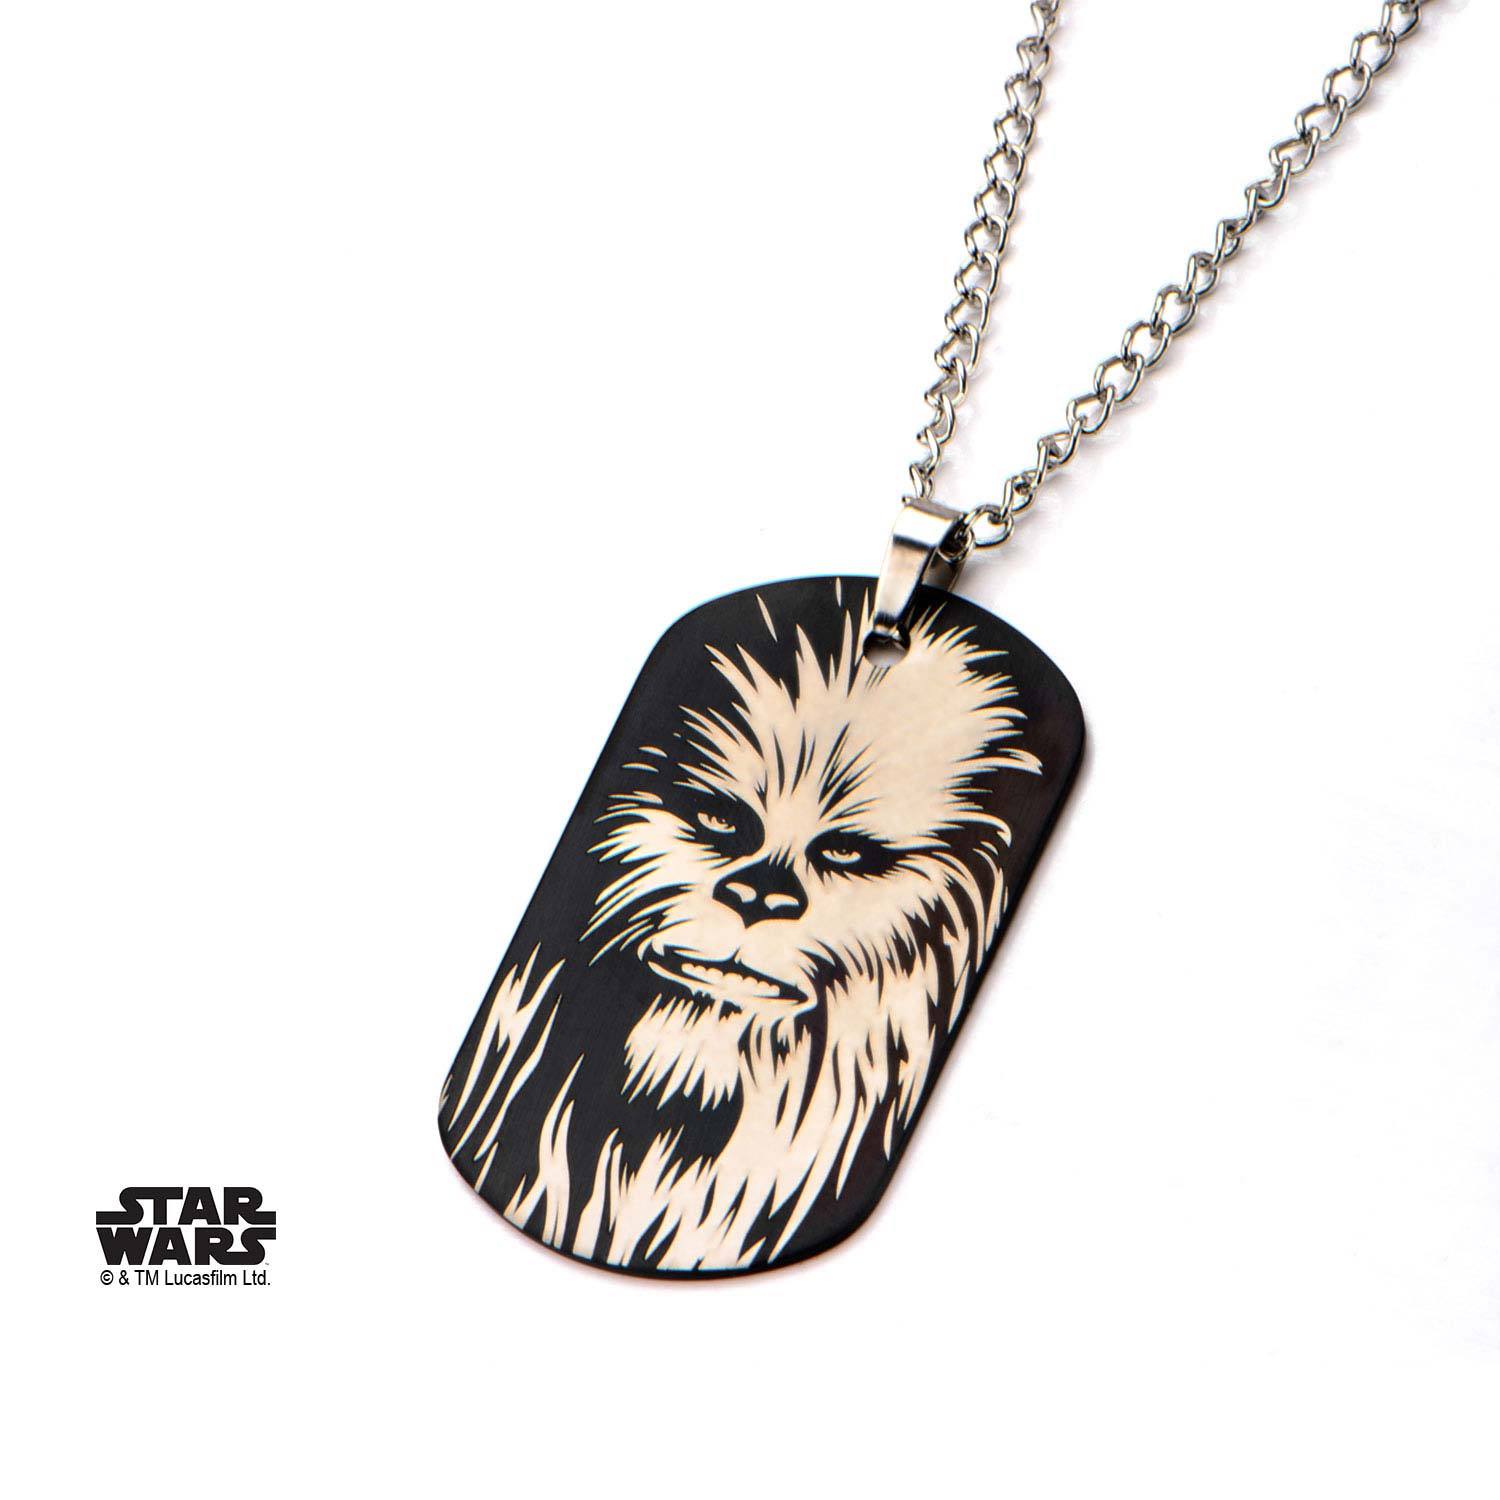 Star Wars Chewbacca Face Dog Tag Pendant Necklace